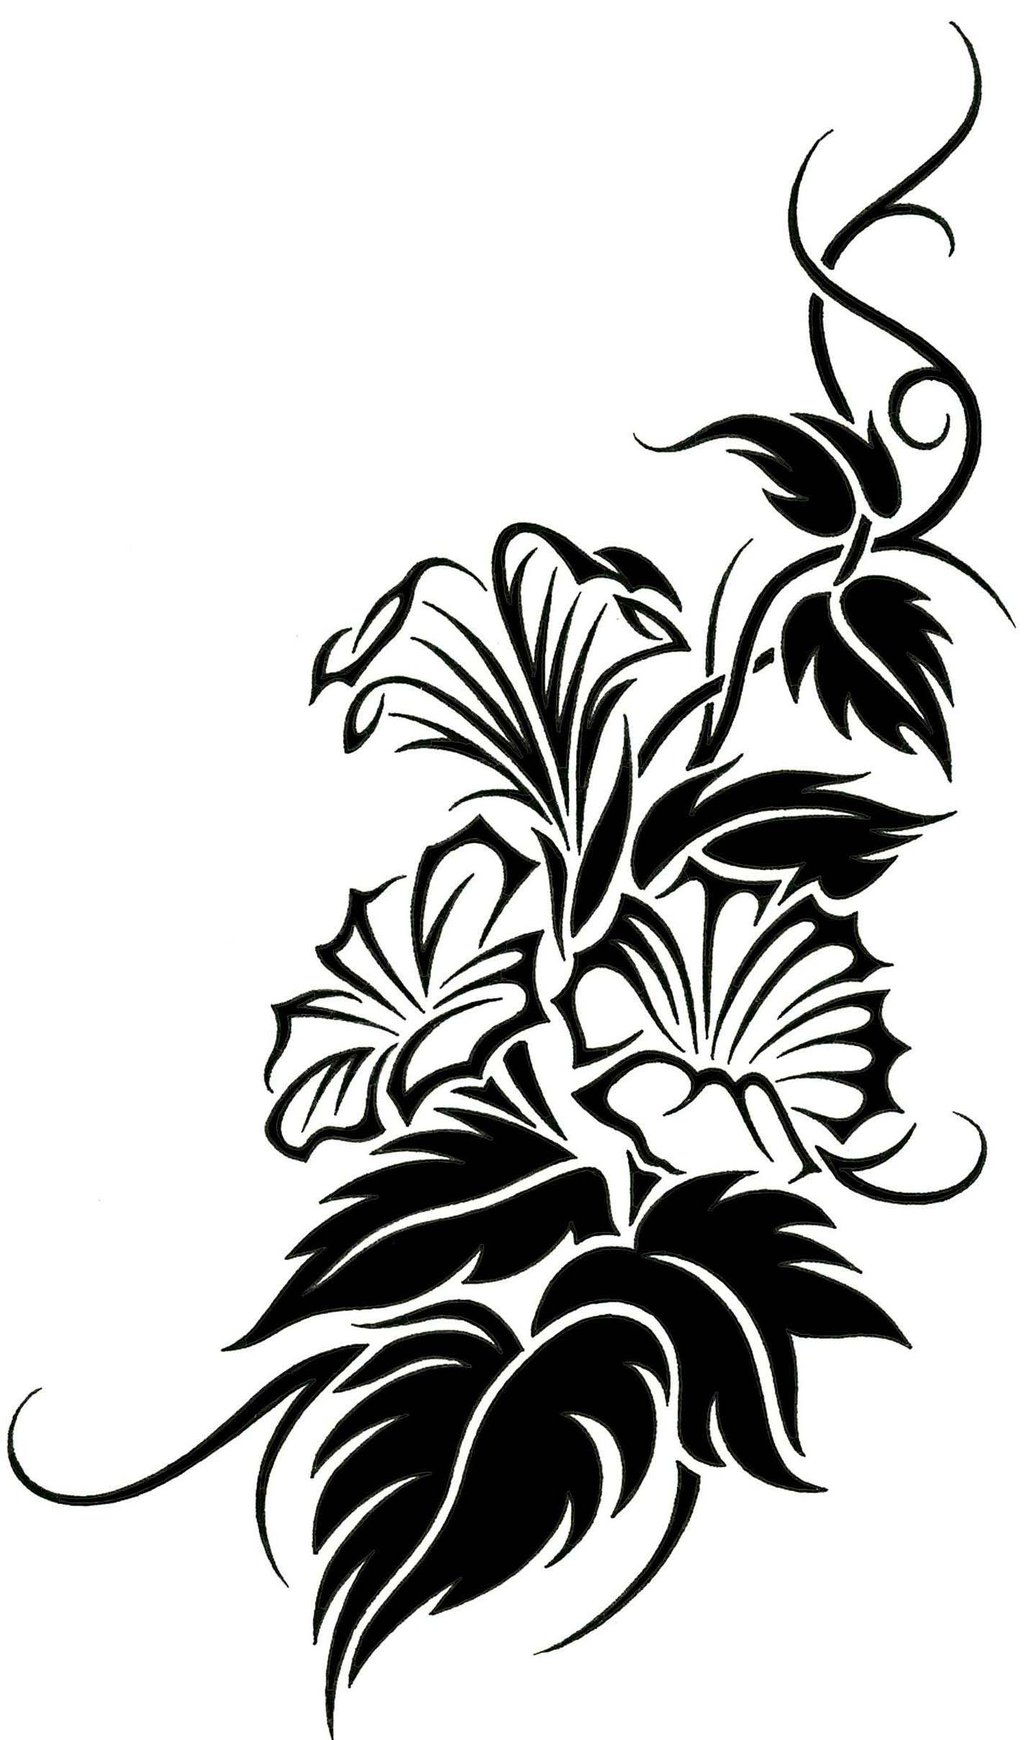 Tribal Heart And Flower Tattoo Designs | Free Download Clip Art ...